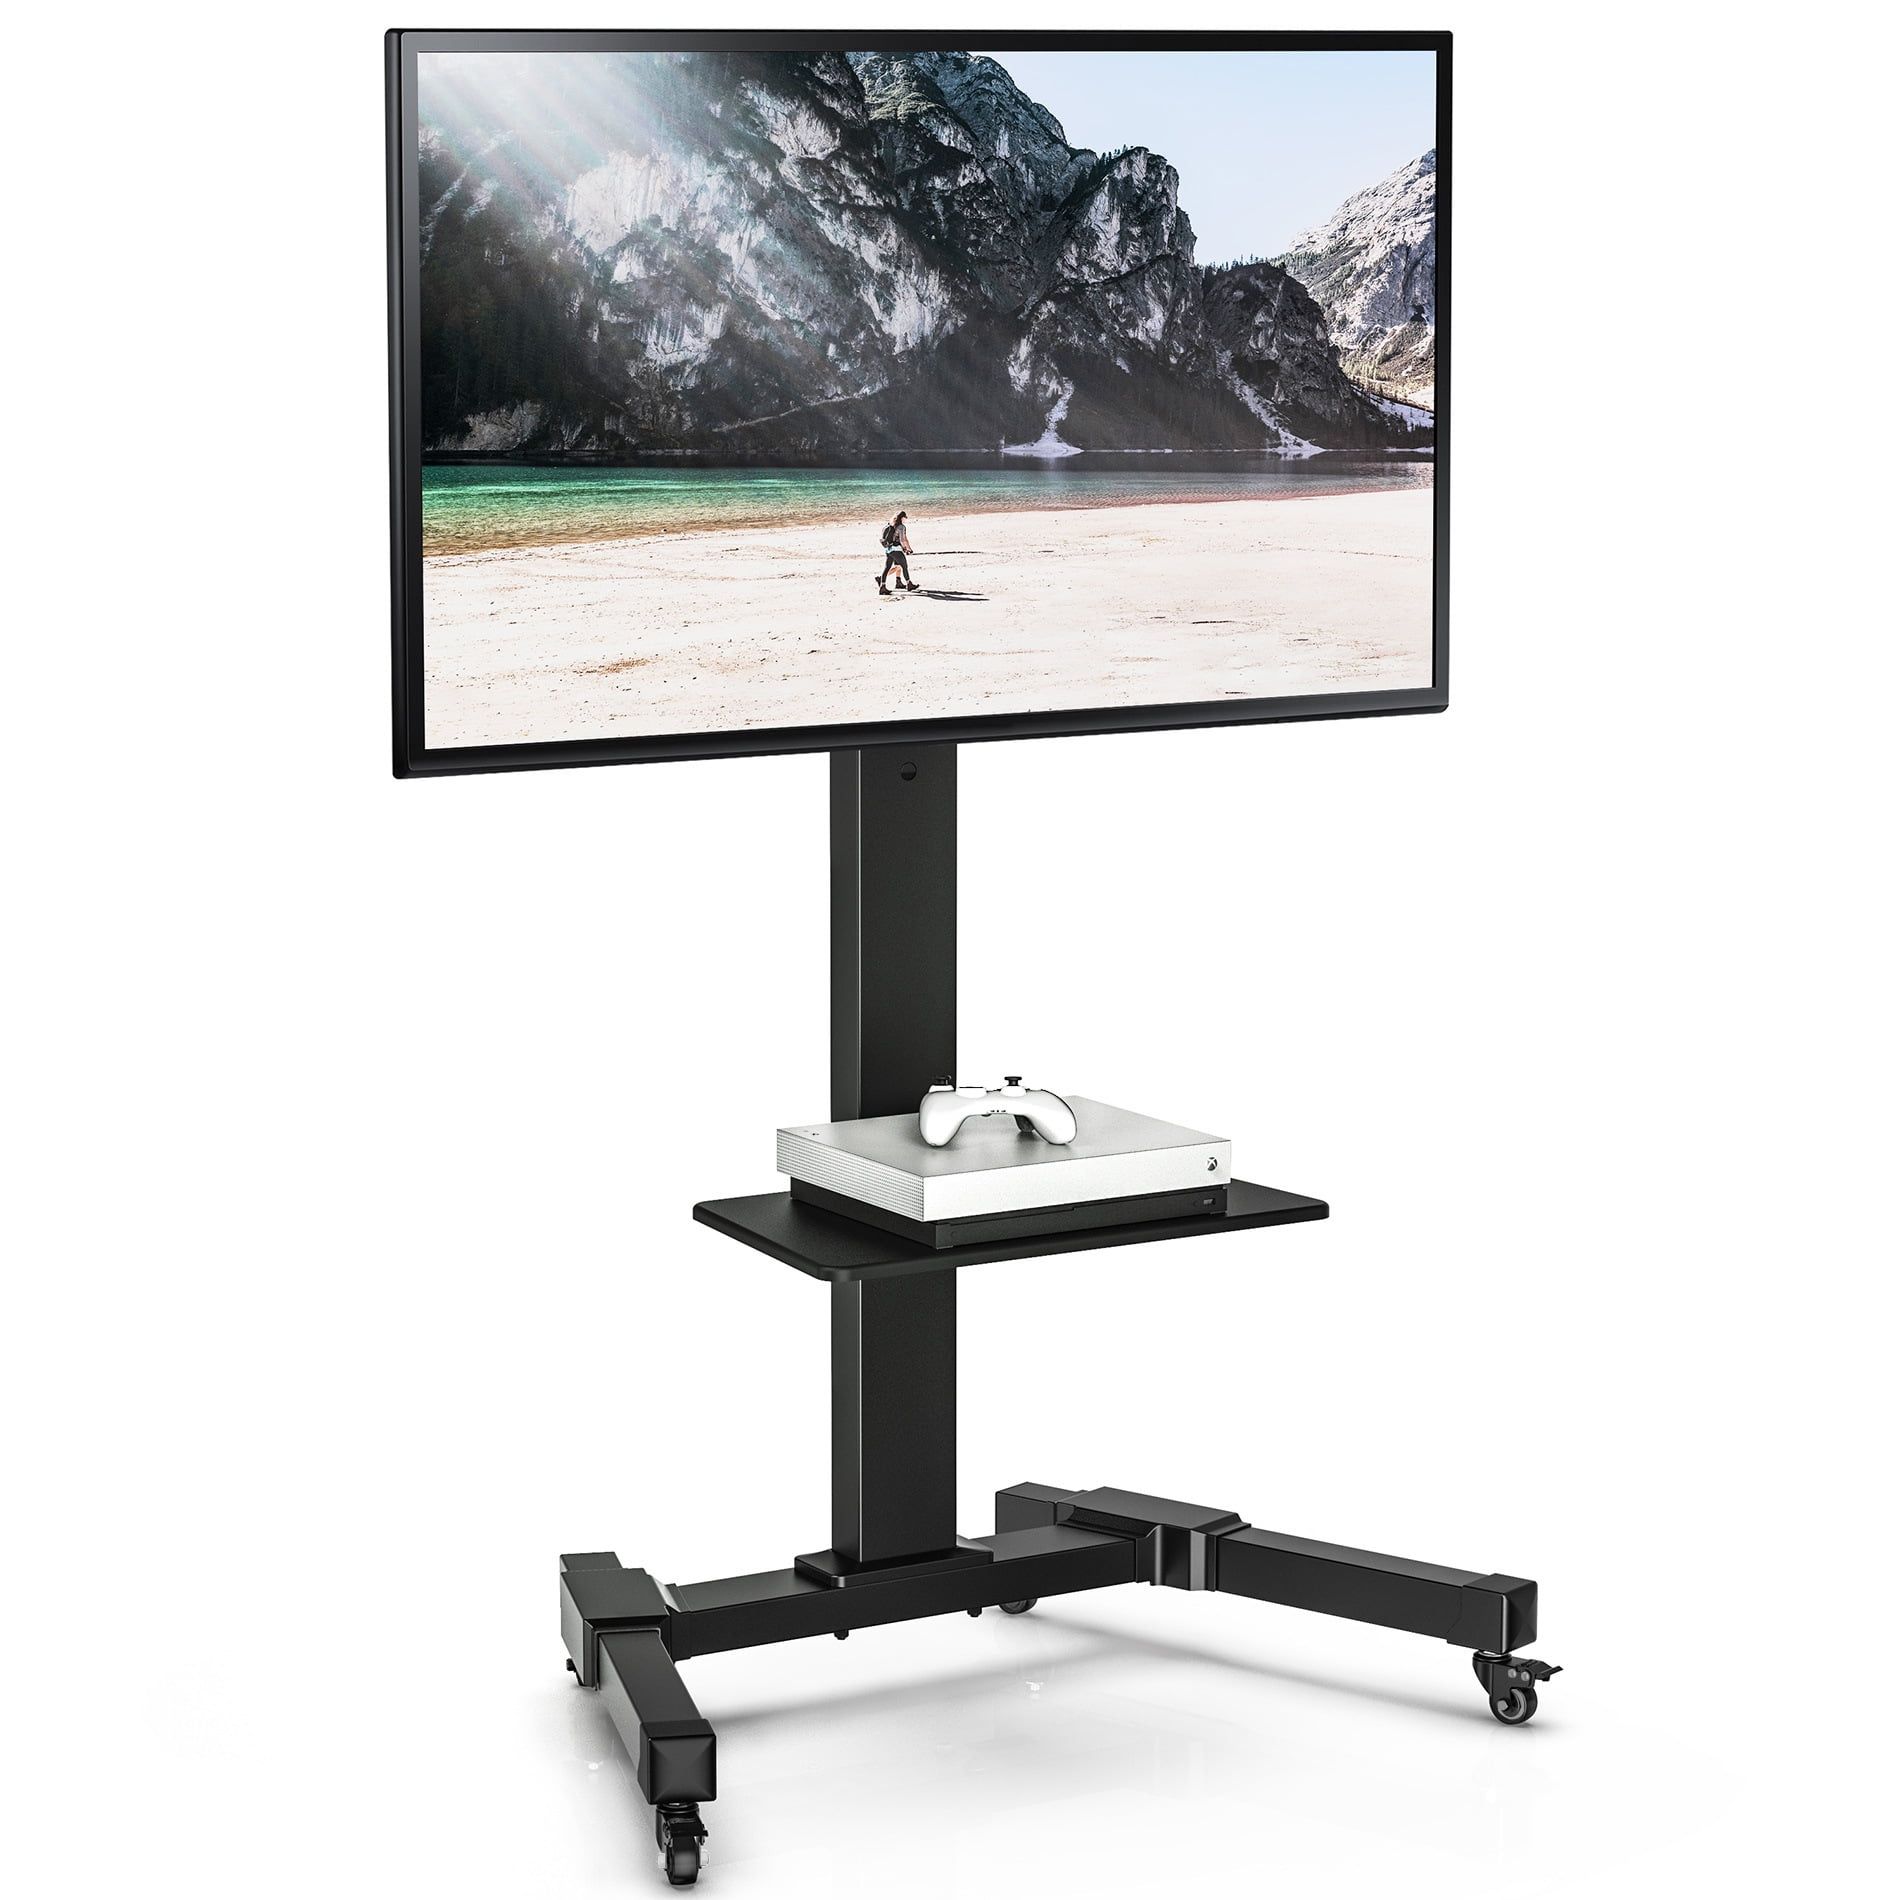 Fitueyes Mobile Swivel Tv Stand Trolley Height Adjustable For 32 To 70 Regarding Foldable Portable Adjustable Tv Stands (Gallery 5 of 20)